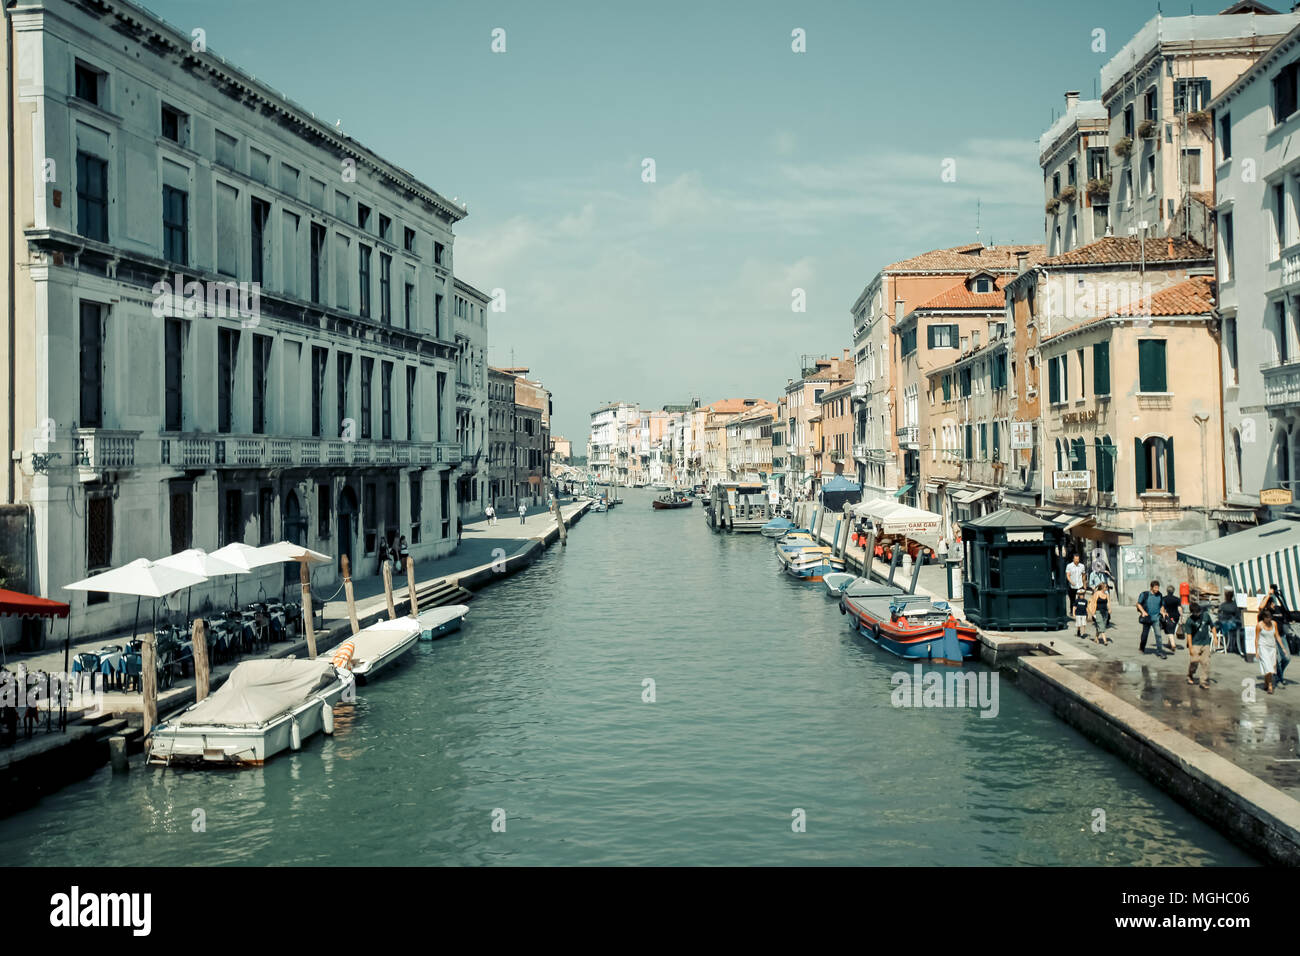 Water Roads And Gondola In Venice City Venezia Architecture And Canals In Italy Cityscape Historic Europe Landmark Stock Photo Alamy